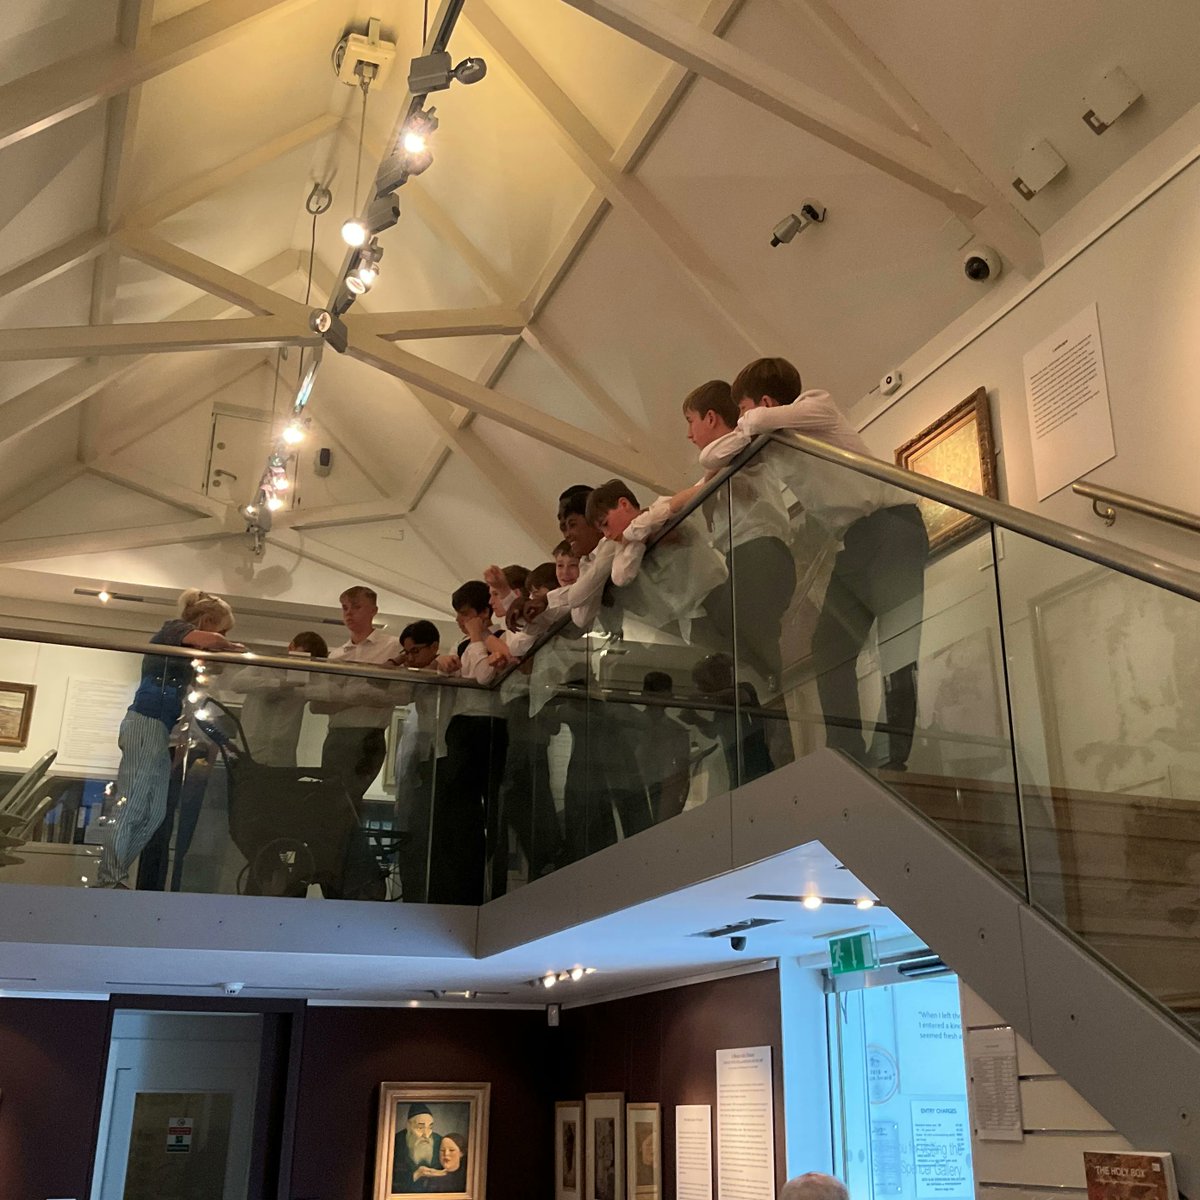 On the first day of a two week leavers programme our Year 8 boys visited Cookham and the Stanley Spencer Gallery.

#SchoolTrip #StanleySpencer #Cookham